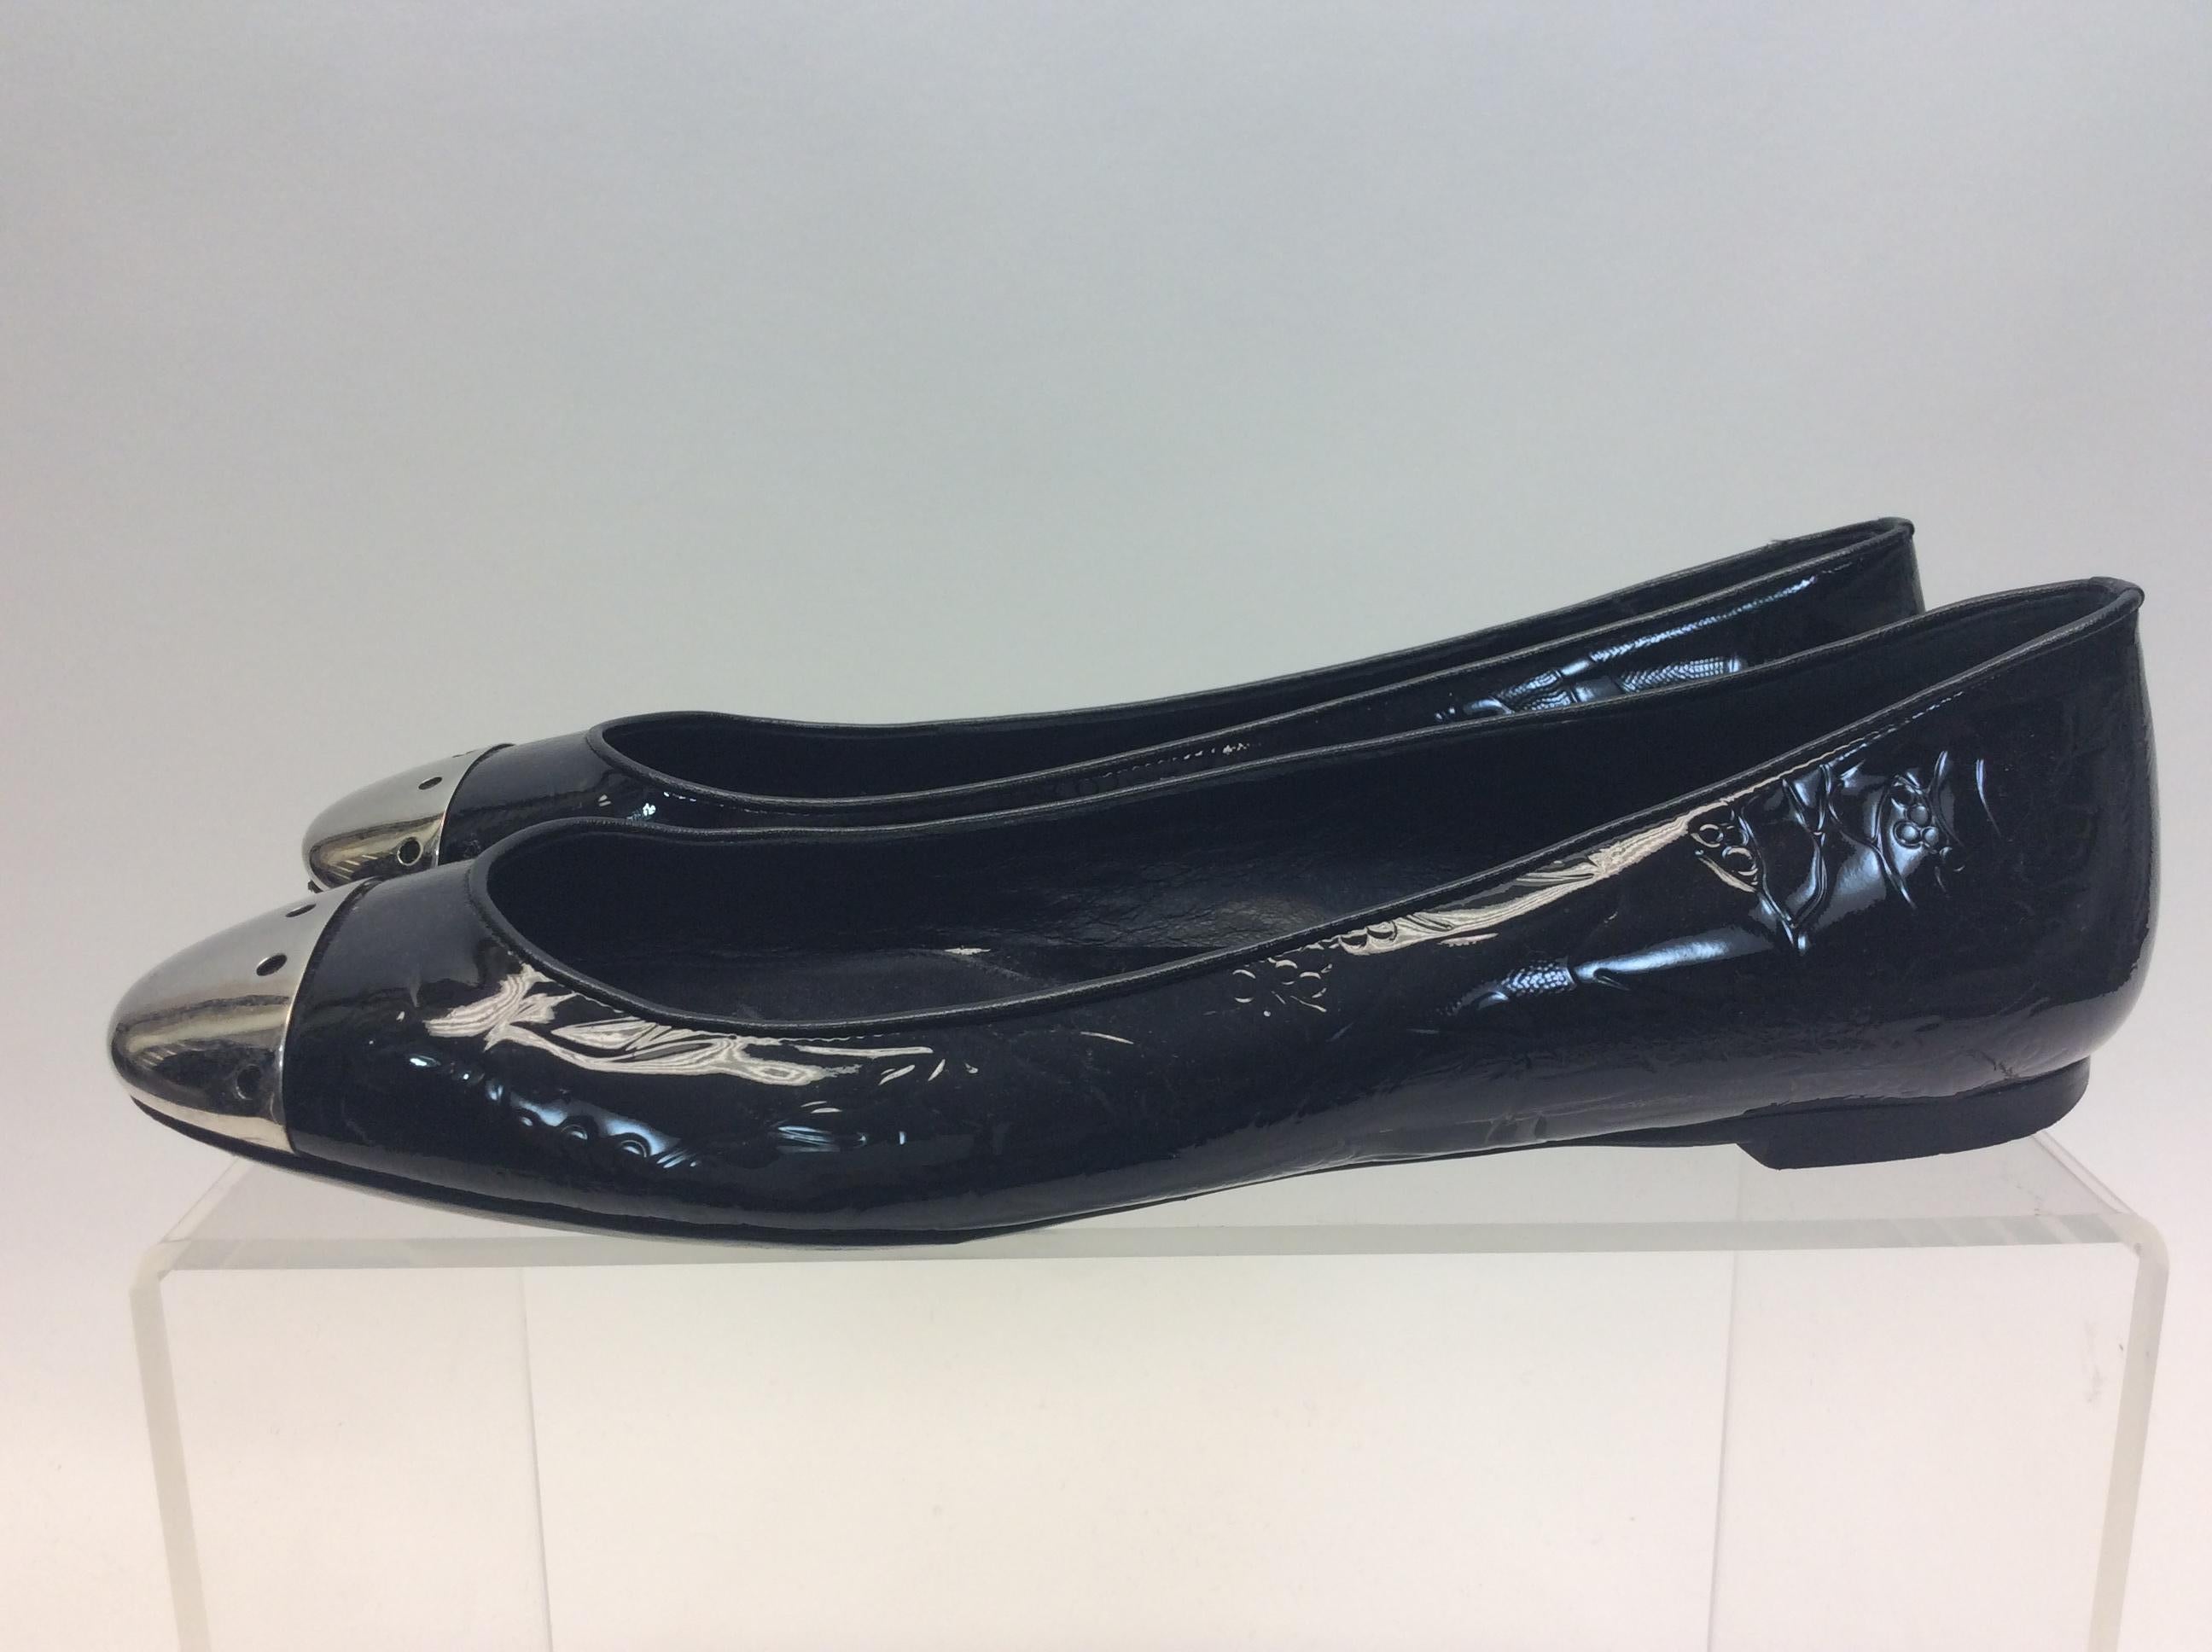 Alexander McQueen Black Patent Leather and Silver Ballet Flats
$165
Made in Italy
Patent Leather
Size 40